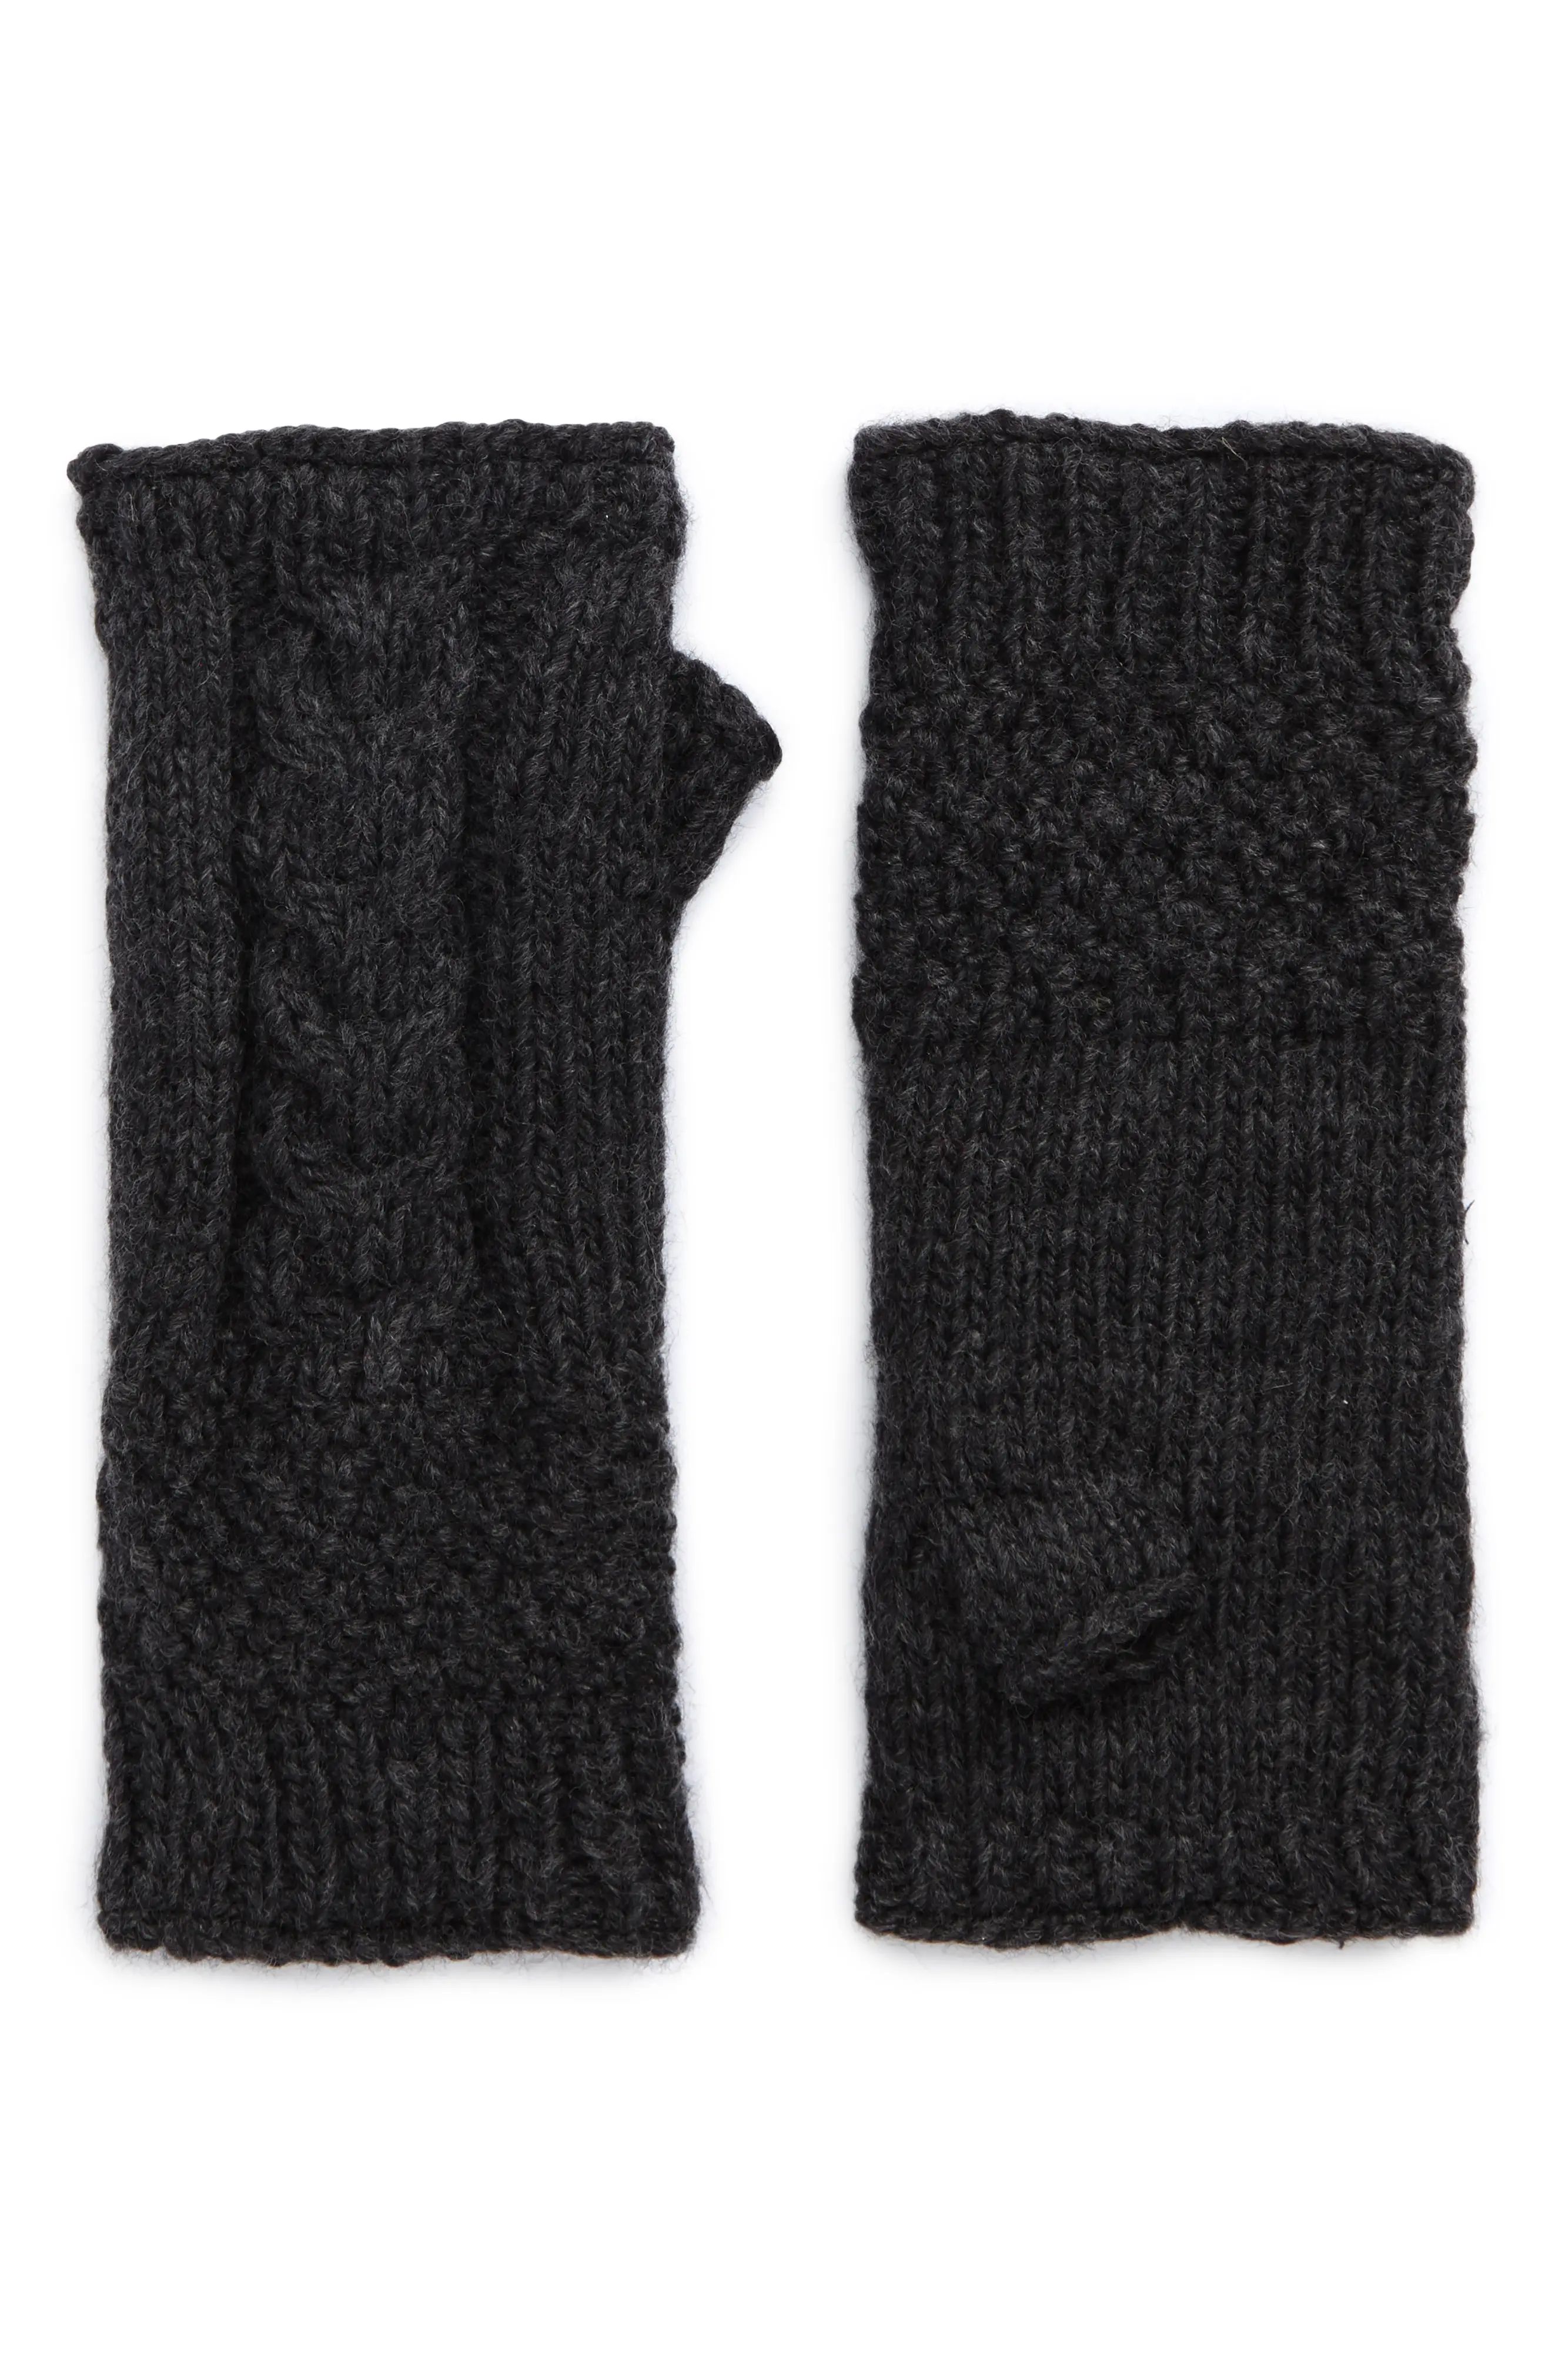 Nirvanna Designs Cable Knit Hand Warmers | Nordstrom